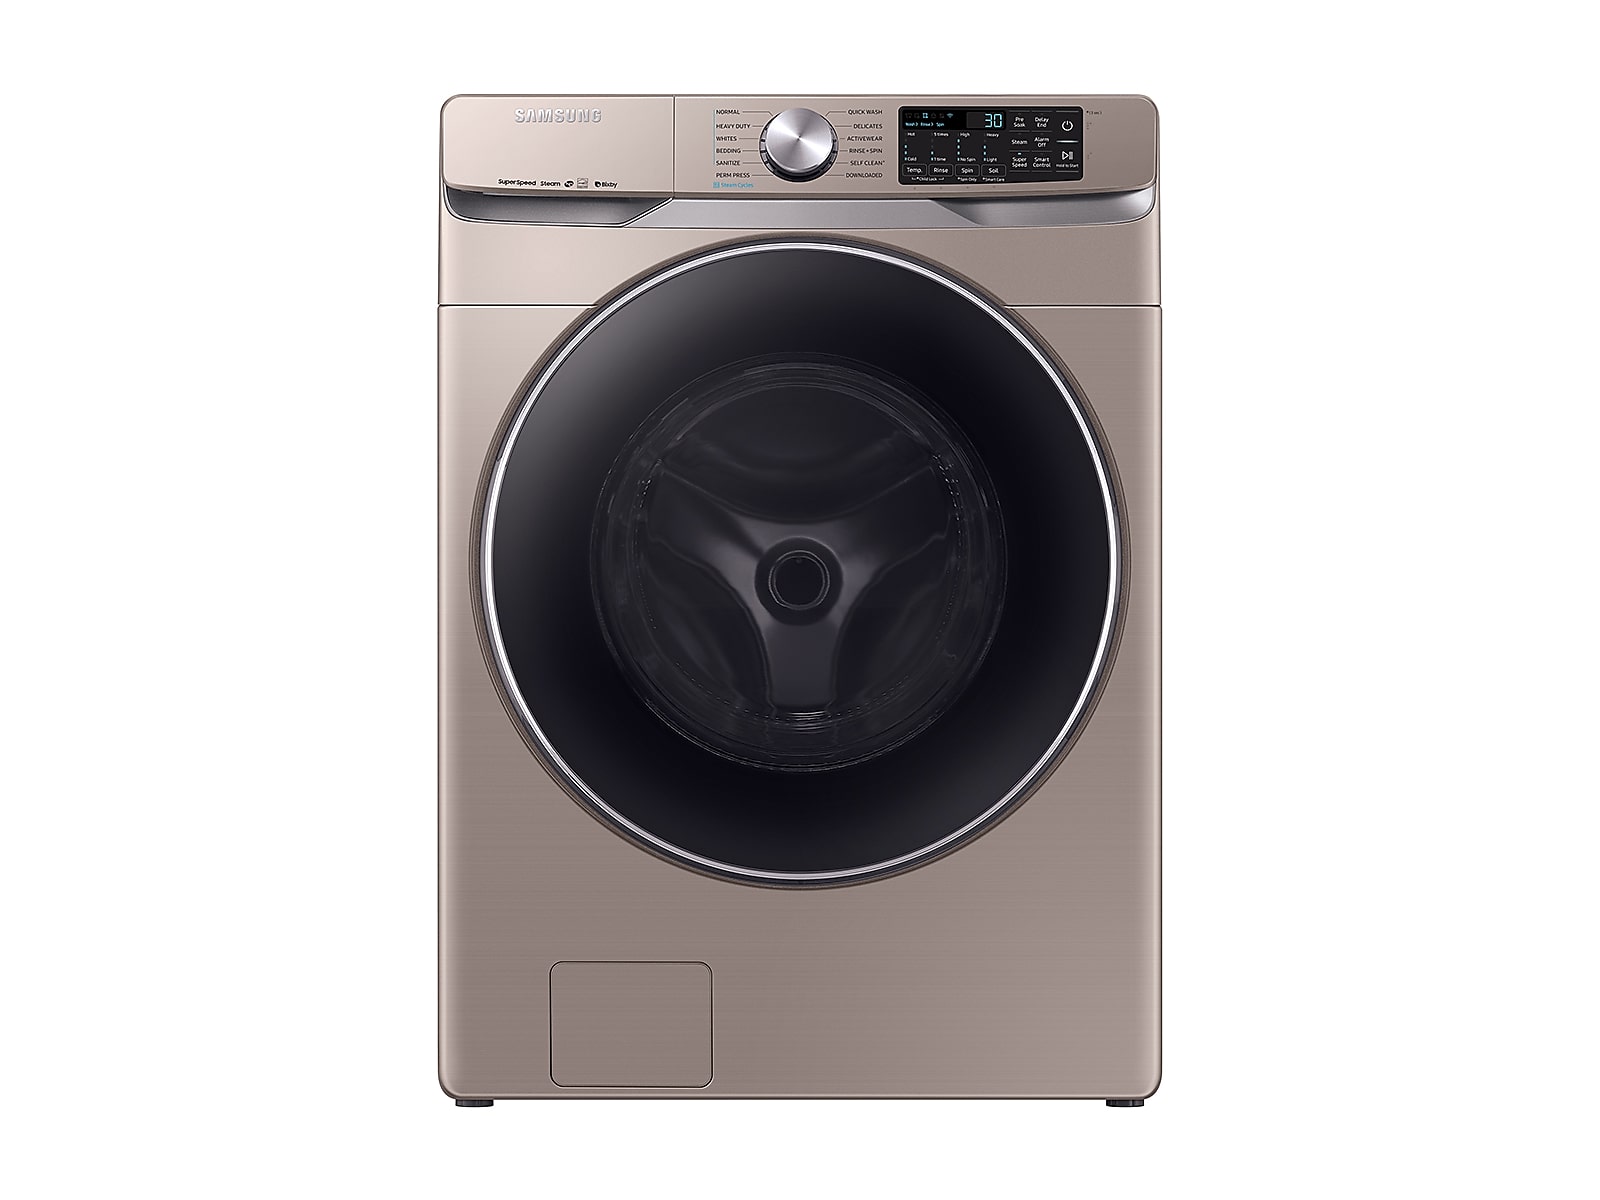 Samsung 4.5 cu. ft. Smart Front Load Washer with Super Speed in Champagne(WF45R6300AC/US) photo